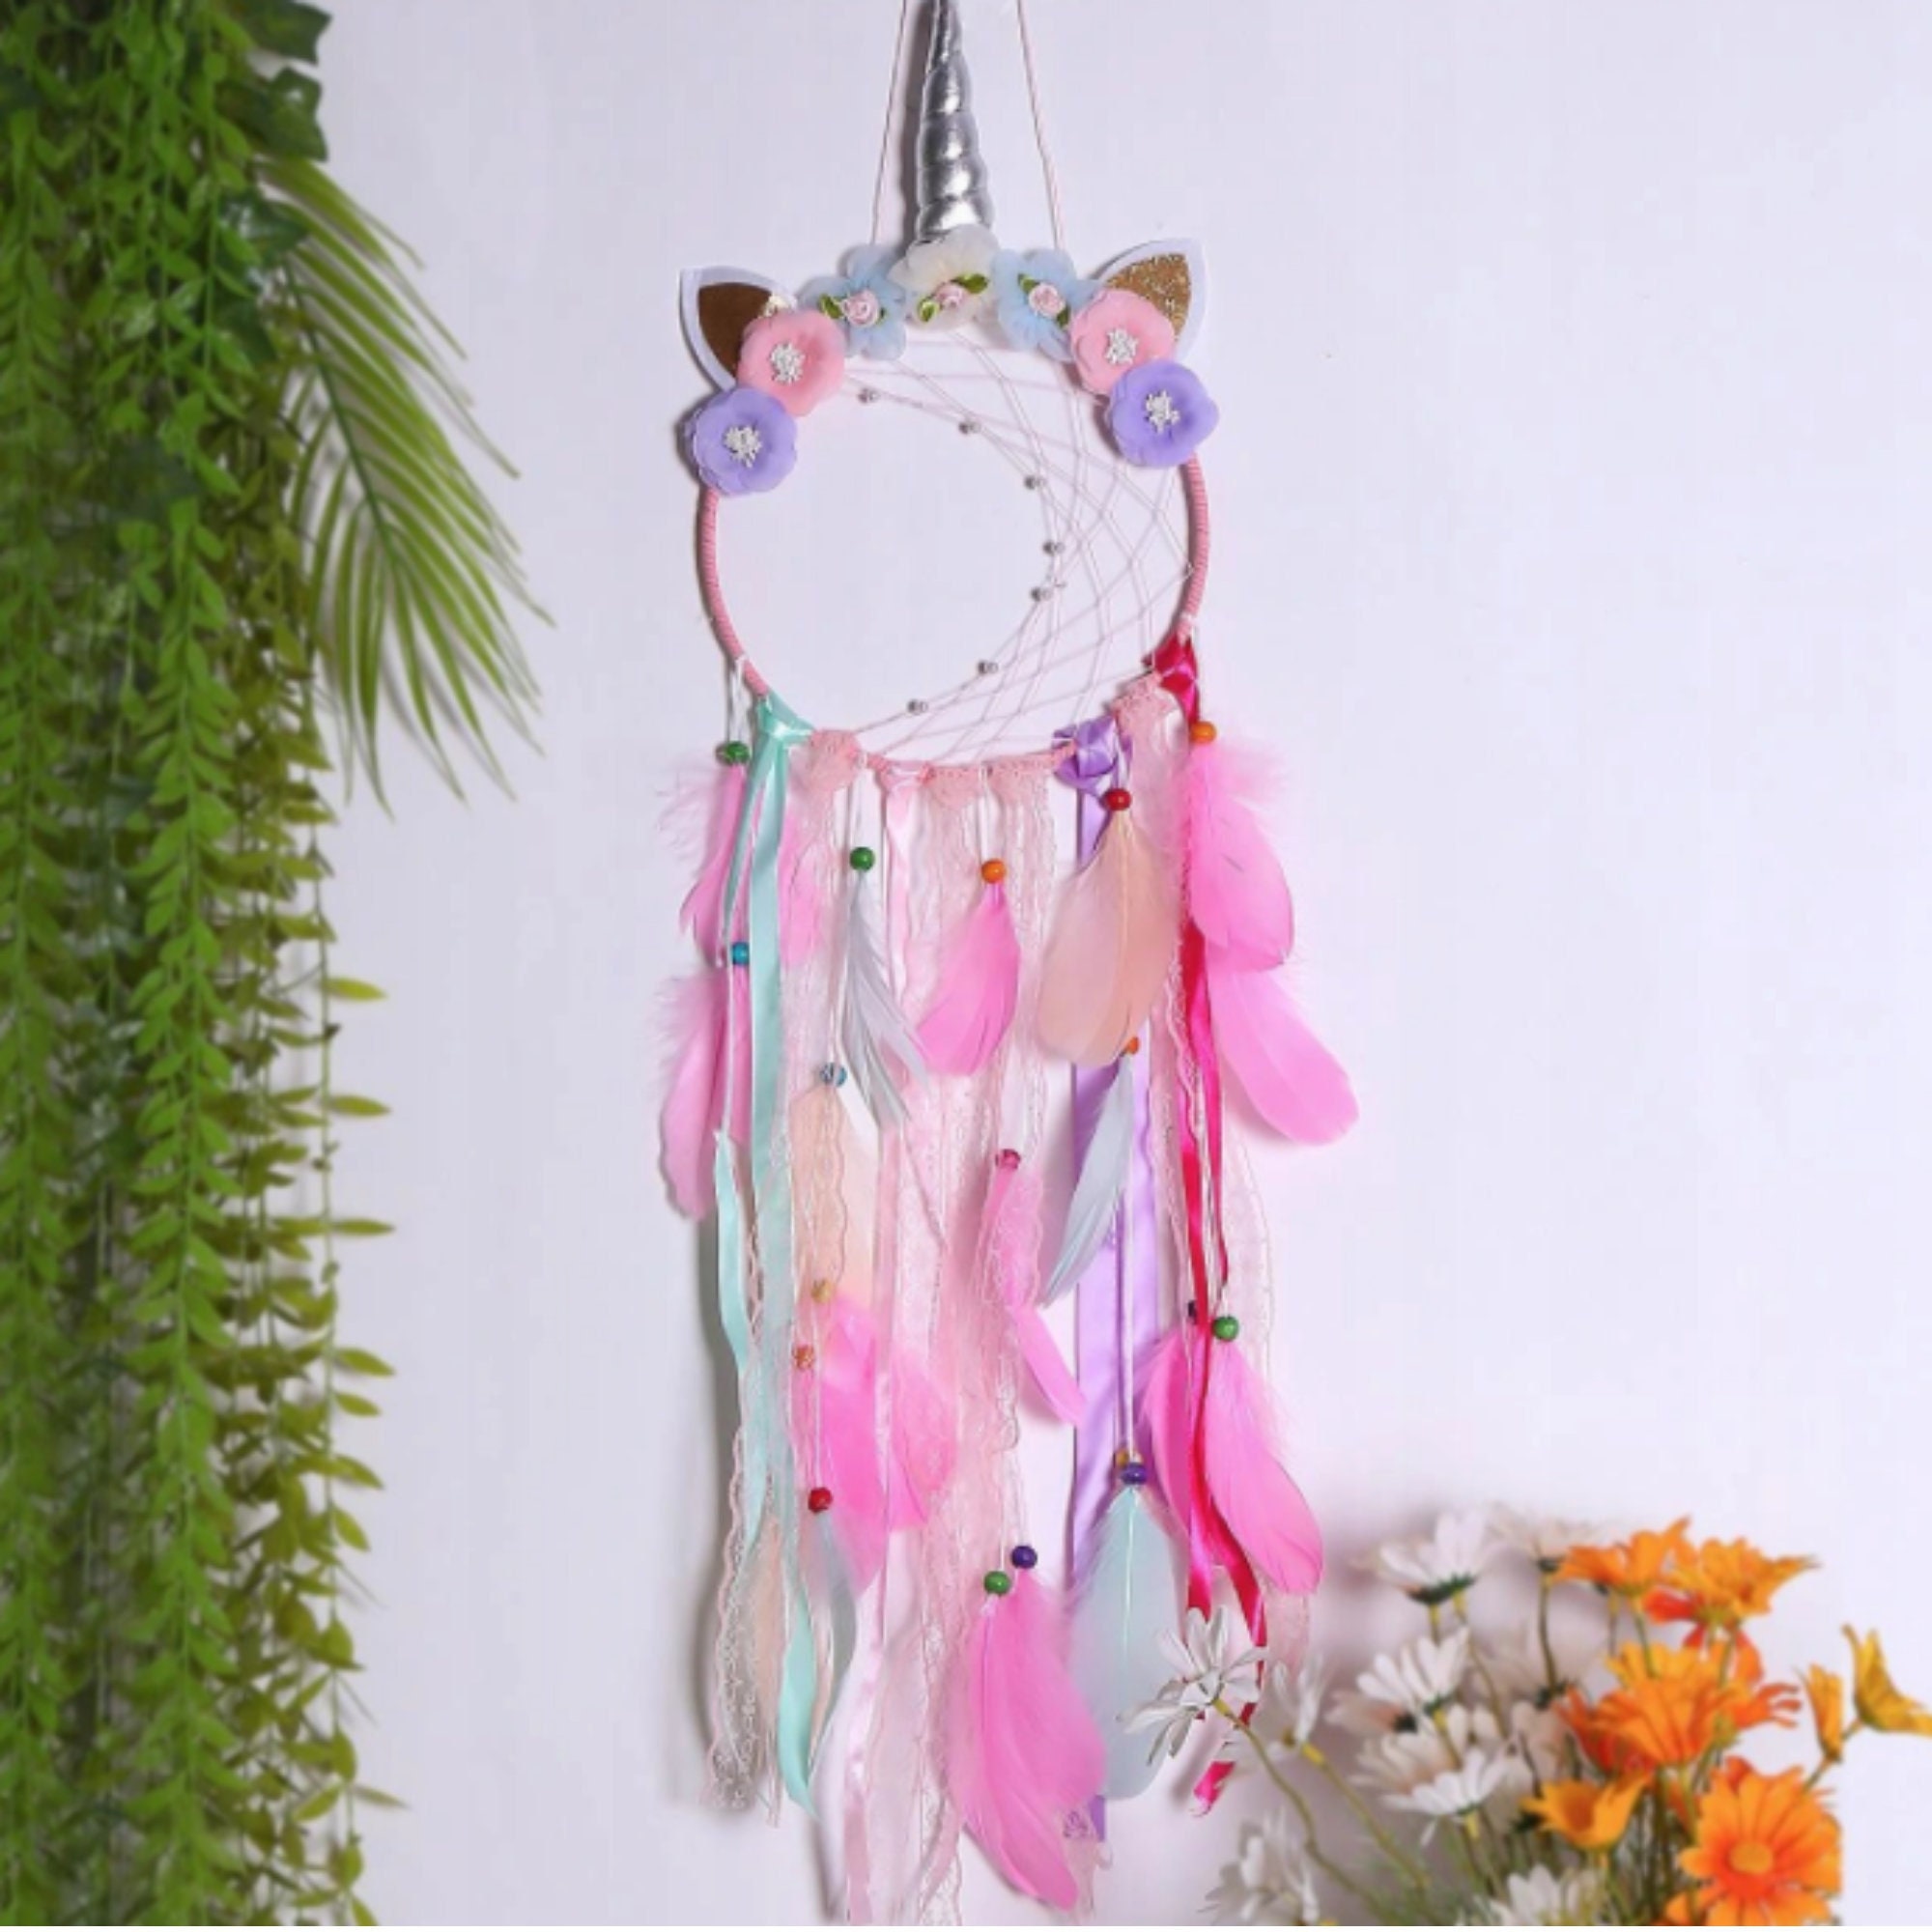 DIY Dreamcatcher Kit, Craft Kit for Teens, Kids Craft Kits for A Party, Do  It Yourself Craft, Creative DIY Project, Craft Kit for Adults 